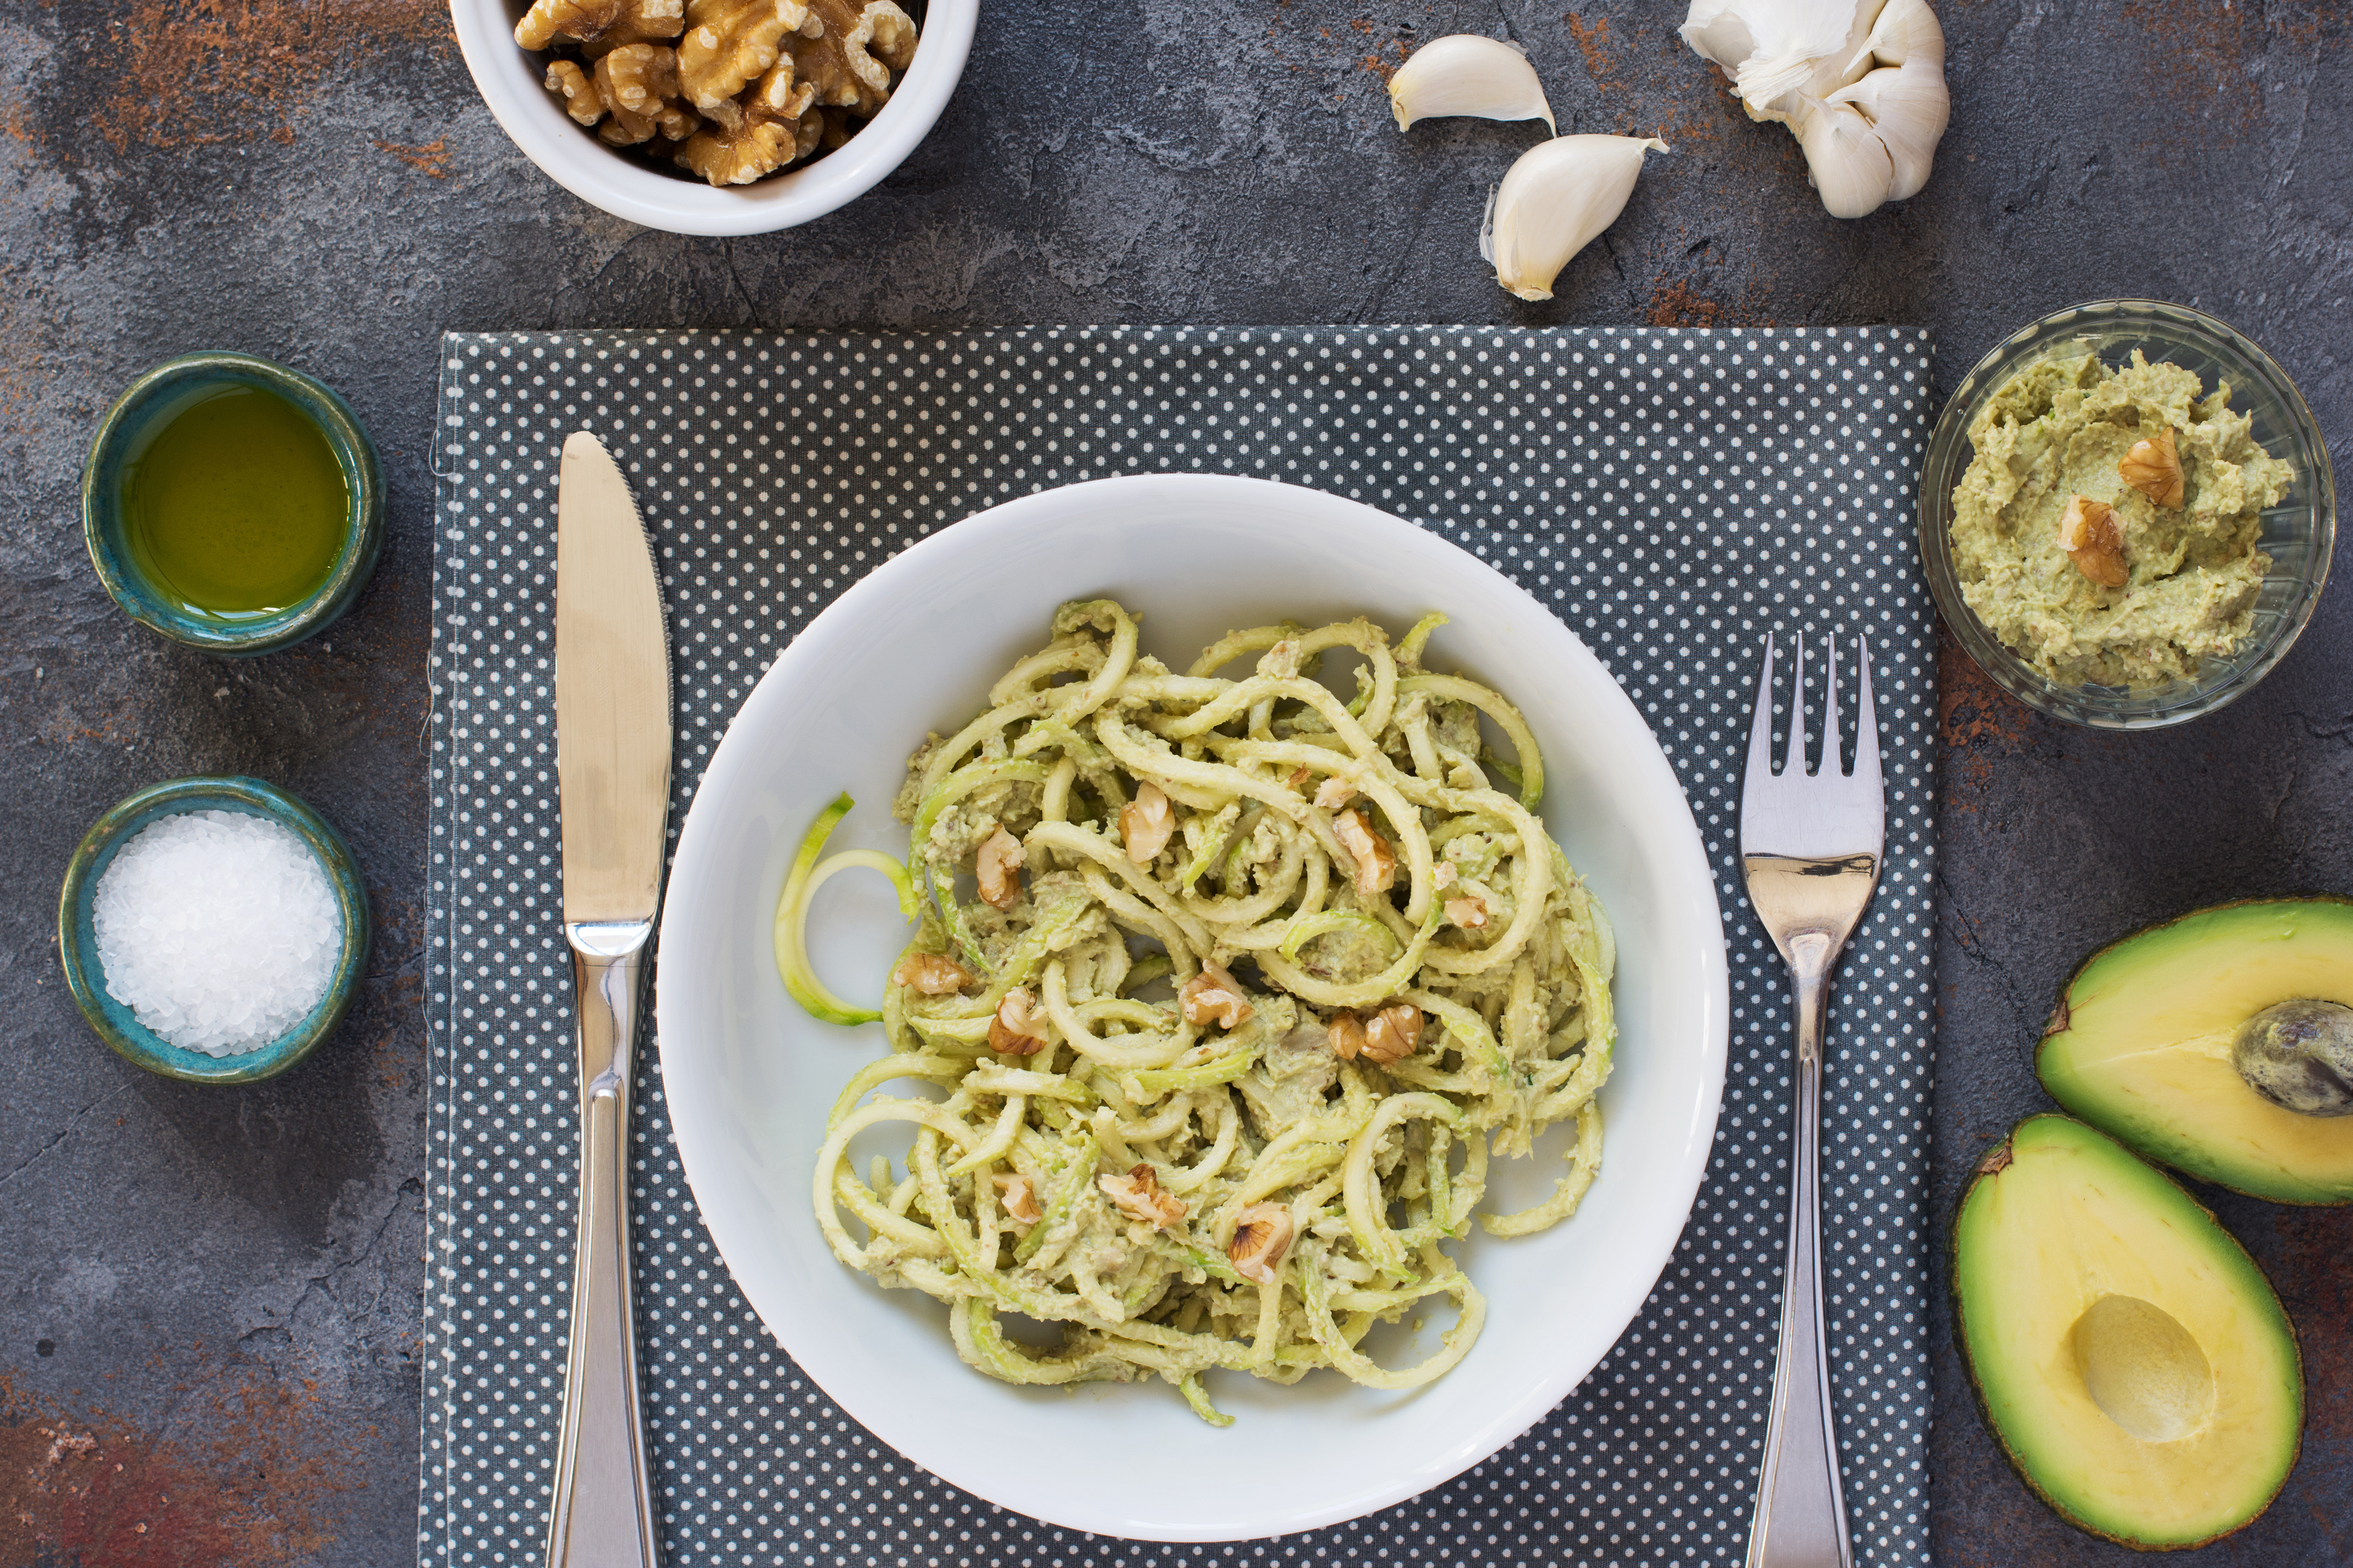 Think beyond guacamole. Pictured here are spiral zucchini noodles with avocado and walnut pesto.